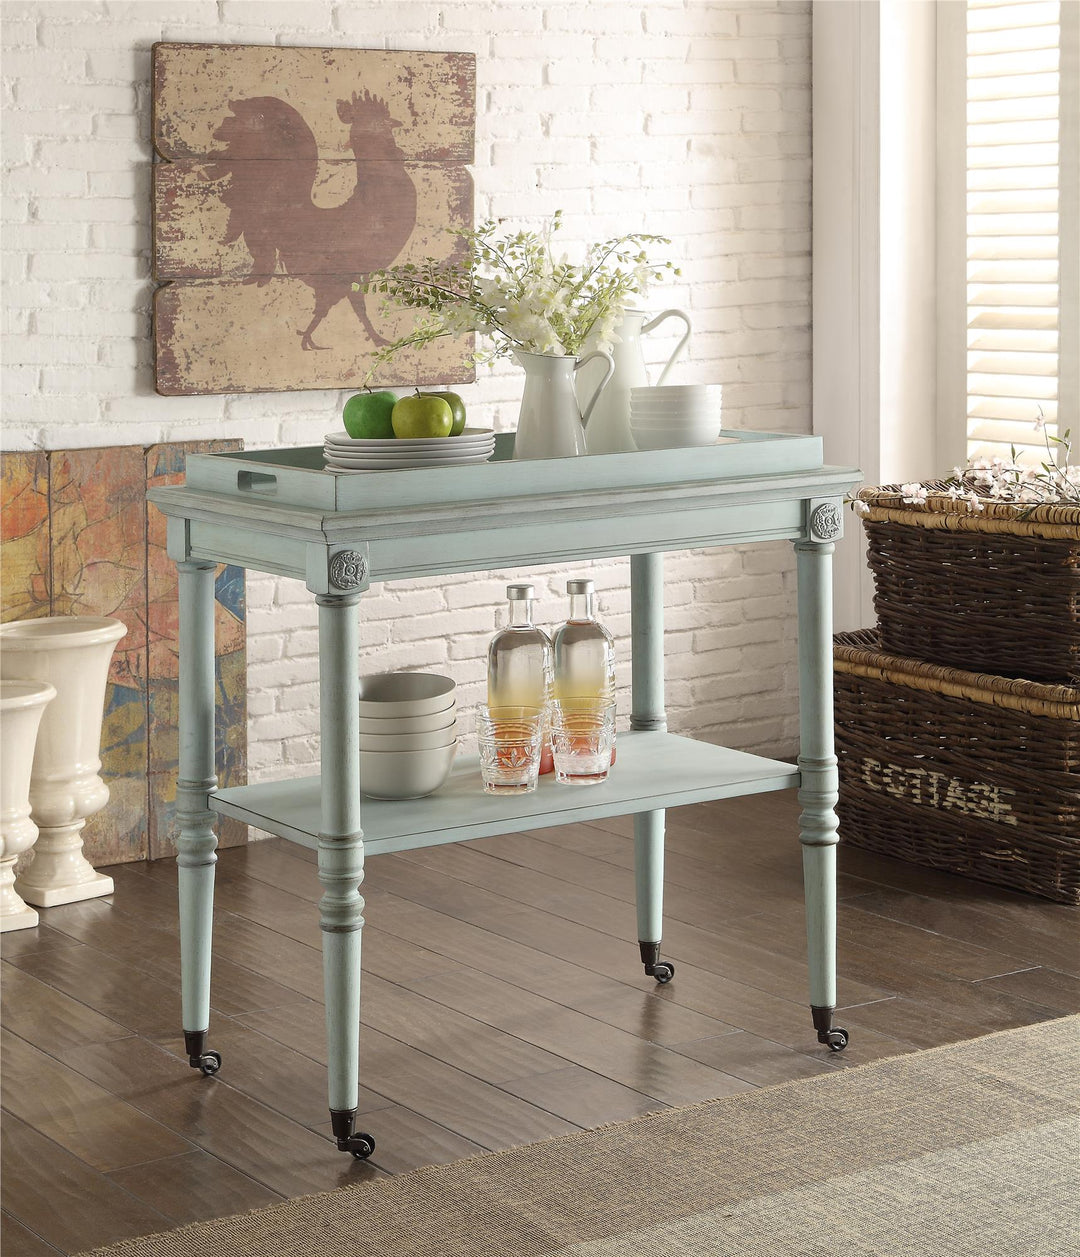 Serving cart with removable tray - Green